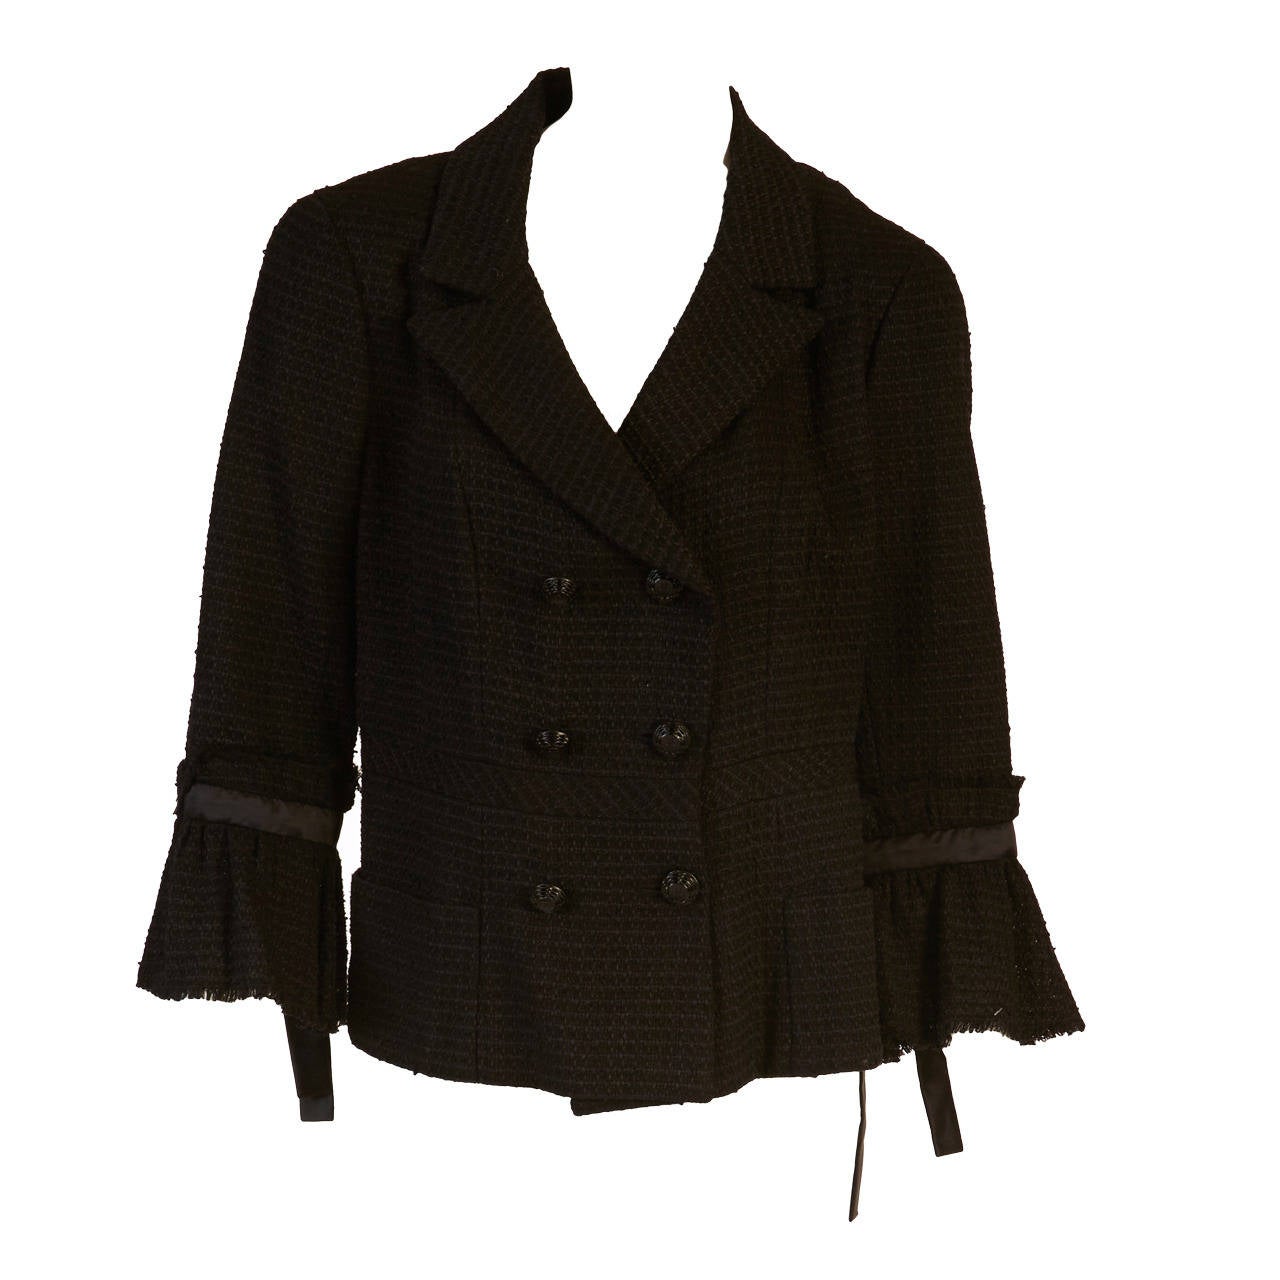 2009 Chanel Black Jacket with Bows